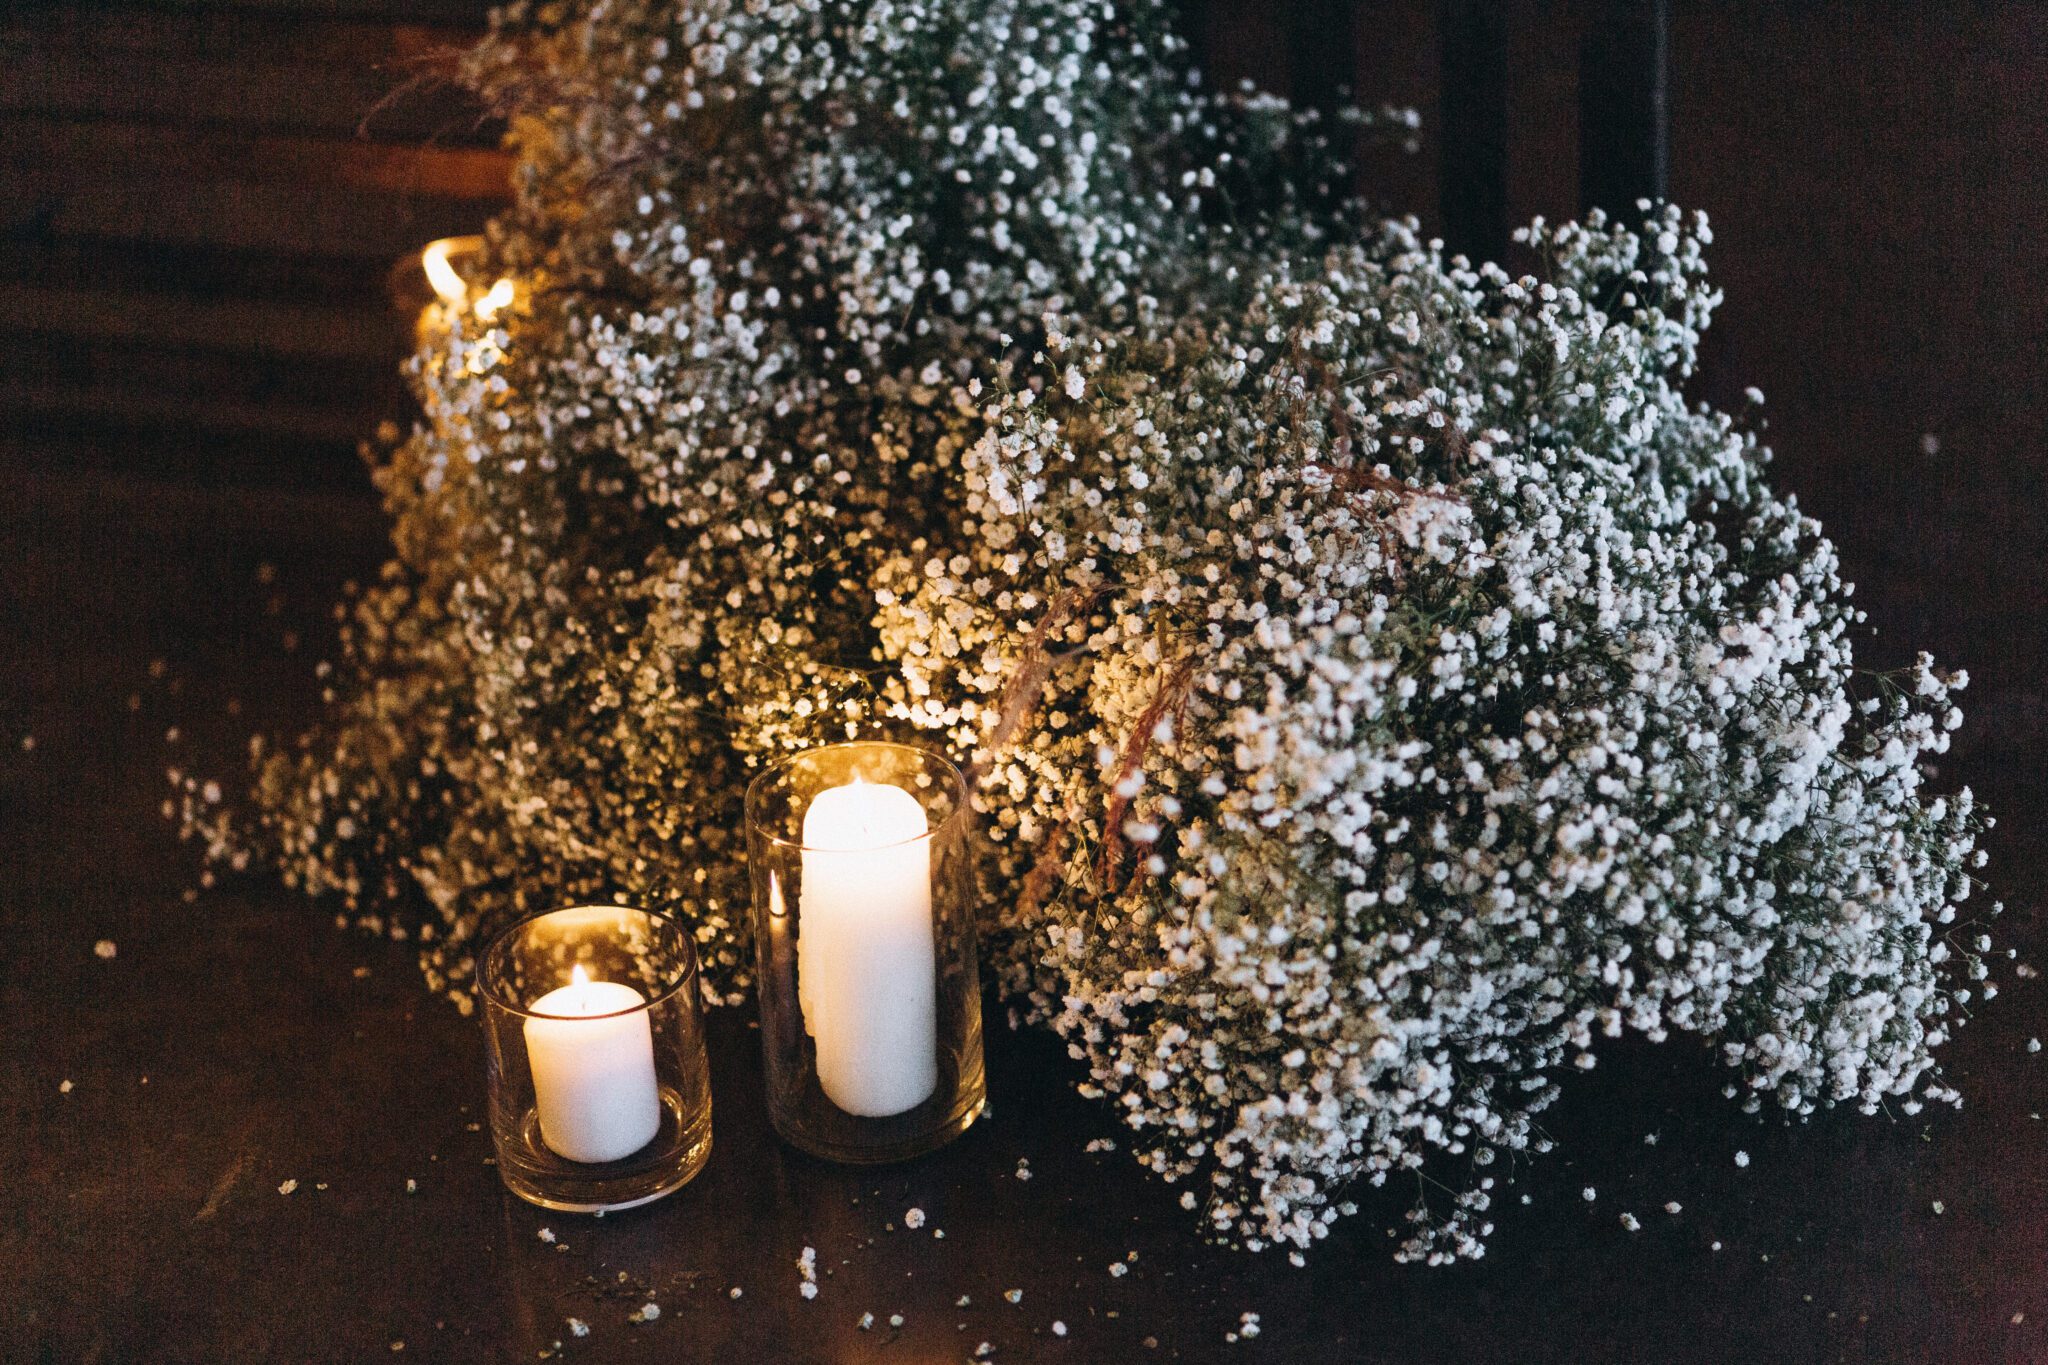 Modernized and updated take on a baby's breath installation for the ceremony arch at this Country Chic style wedding inspiration, ceremony arch inspiration with baby's breath and candles